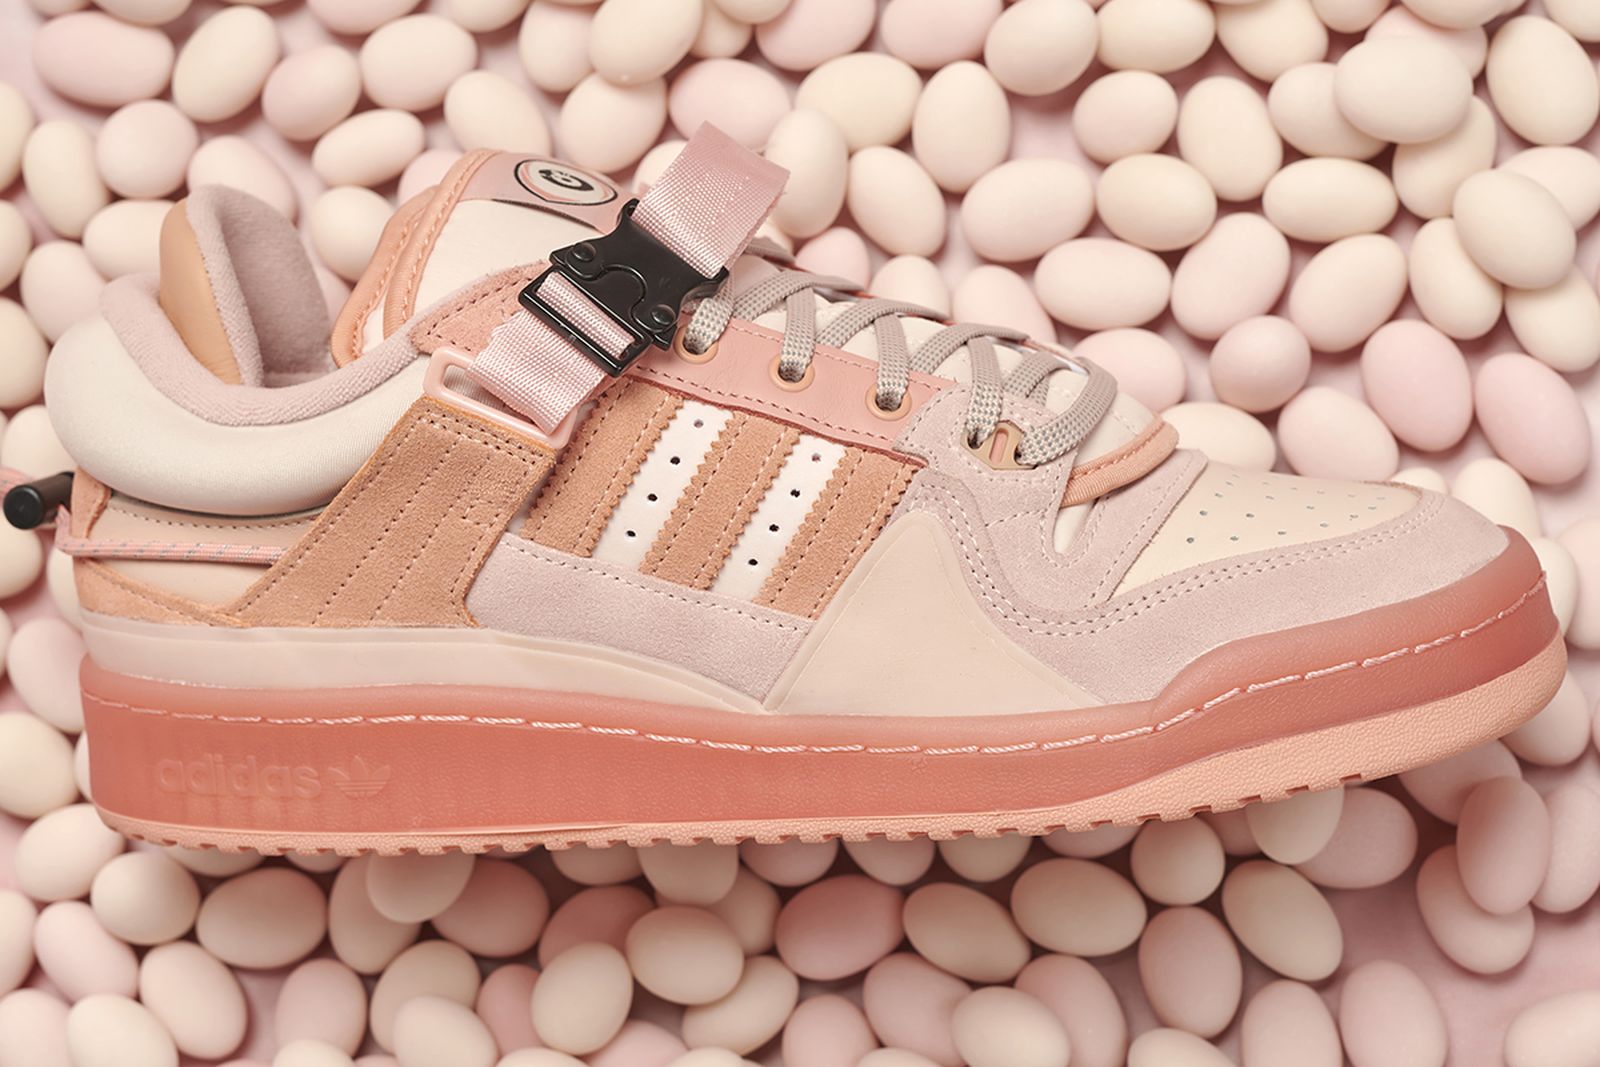 bad-bunny-adidas-forum-buckle-low-pink-release-date-price-02